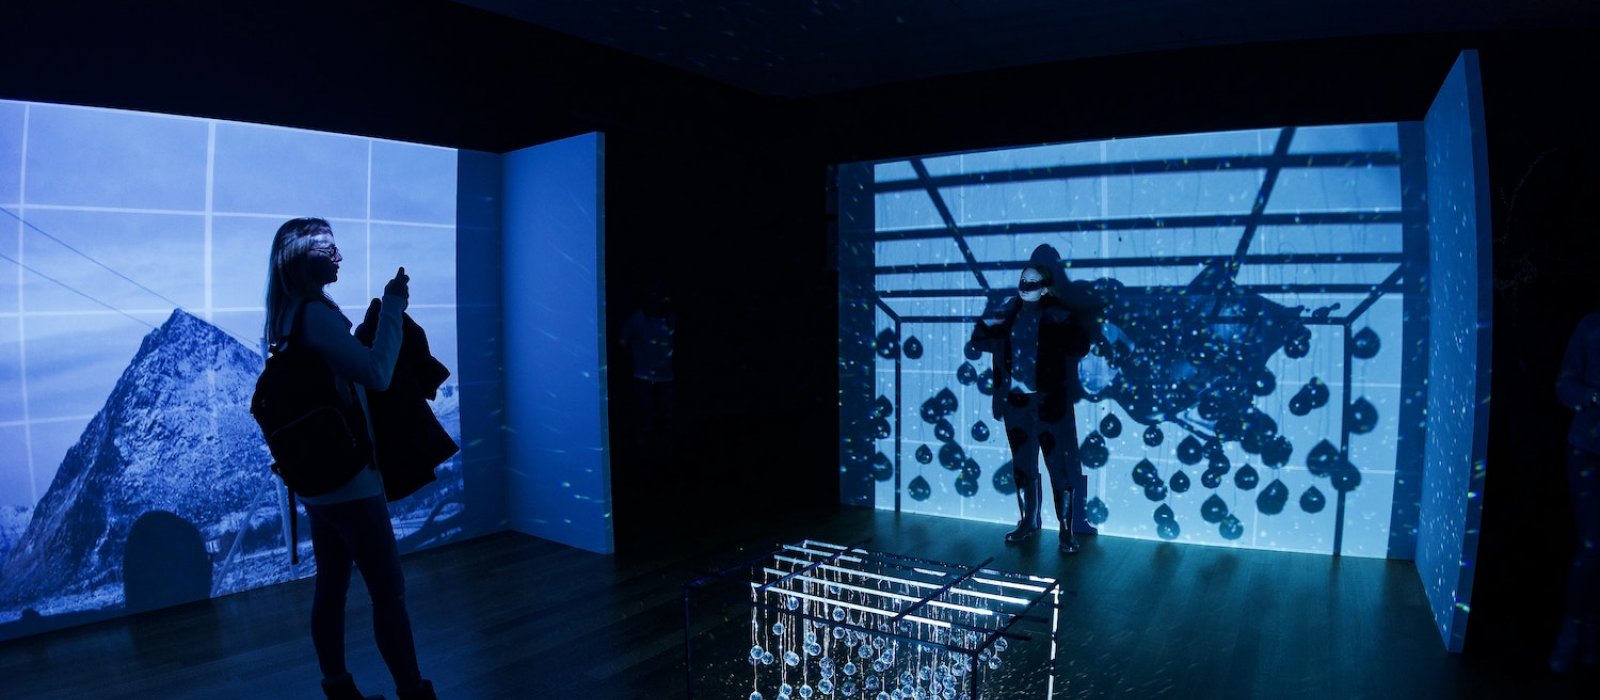 Two people standing in a dark room with blue projections